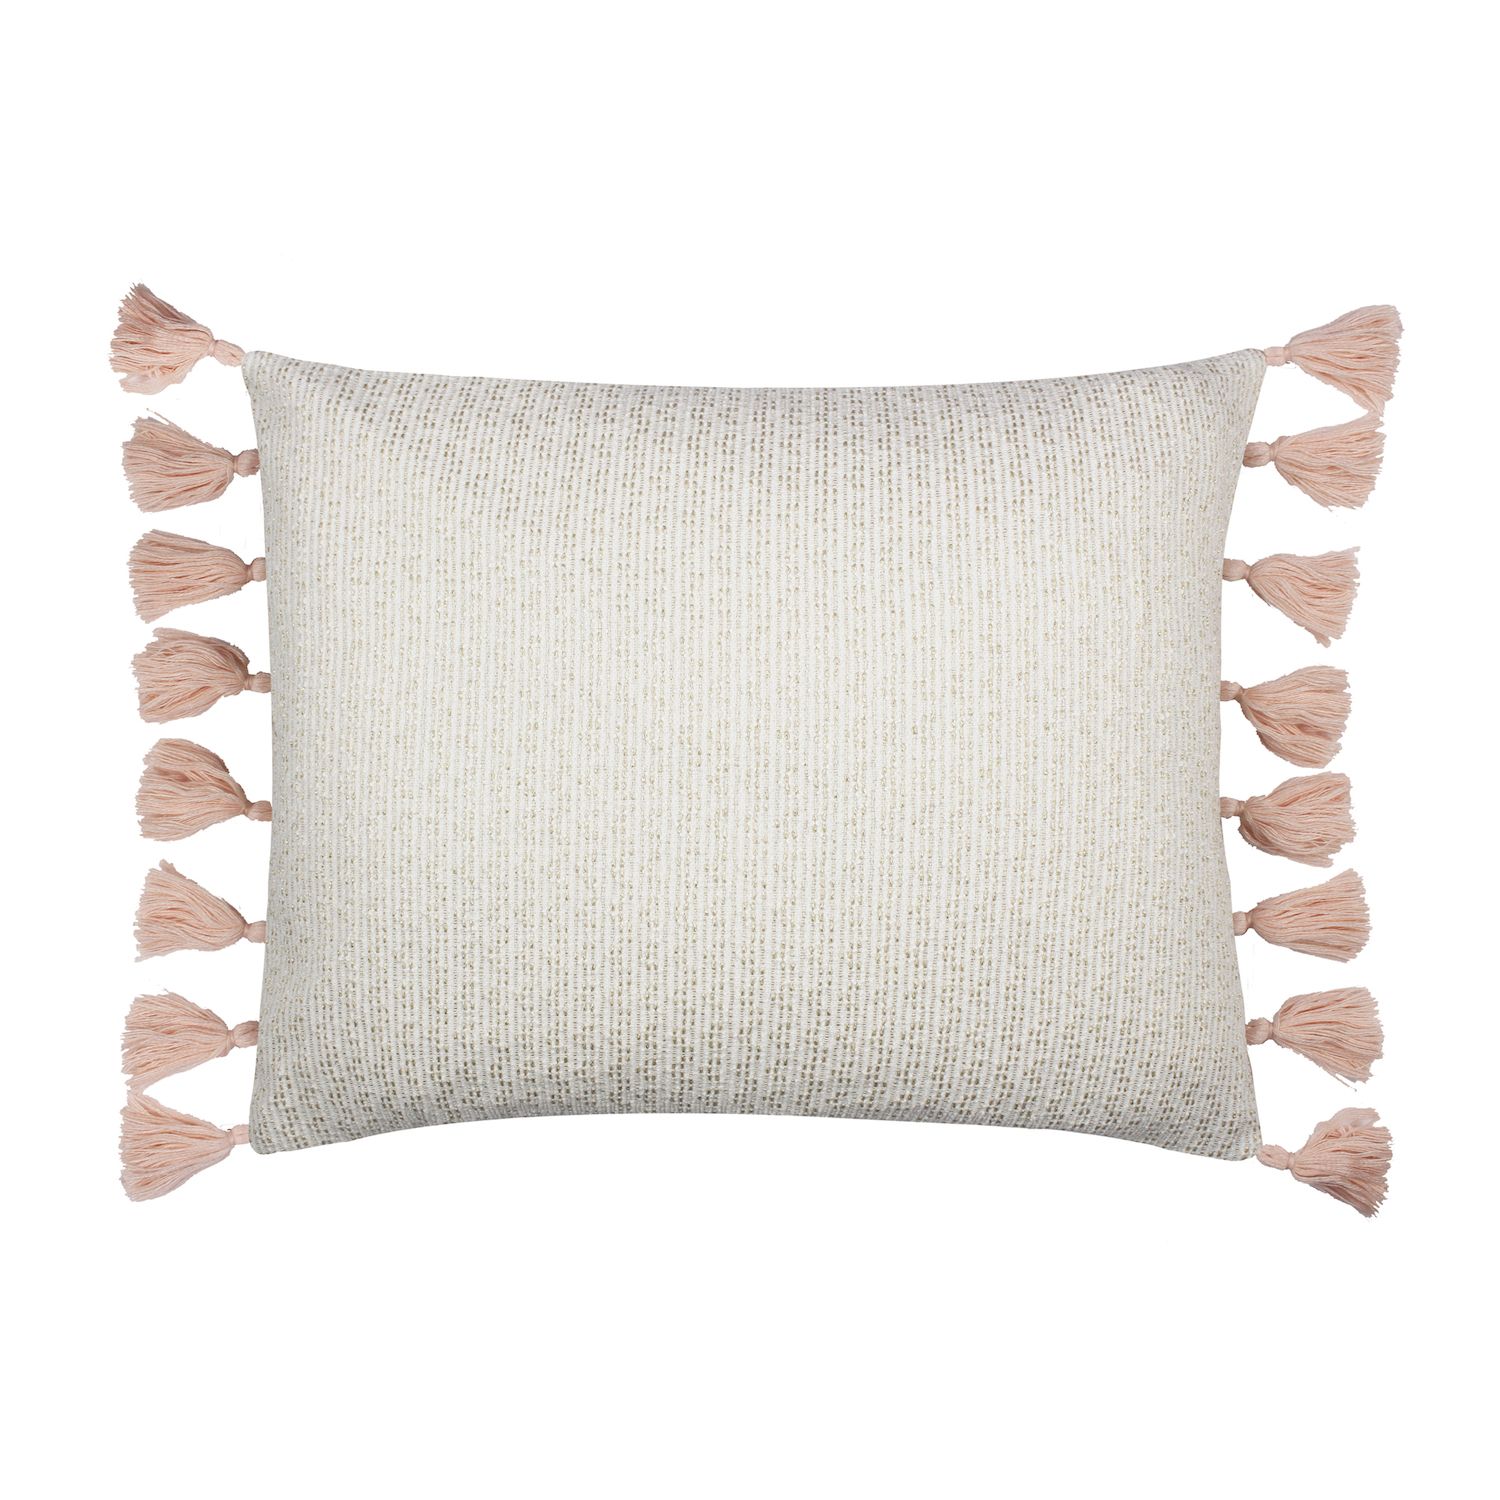 Image for Levtex Home Fiori Textured Blush Pillow at Kohl's.